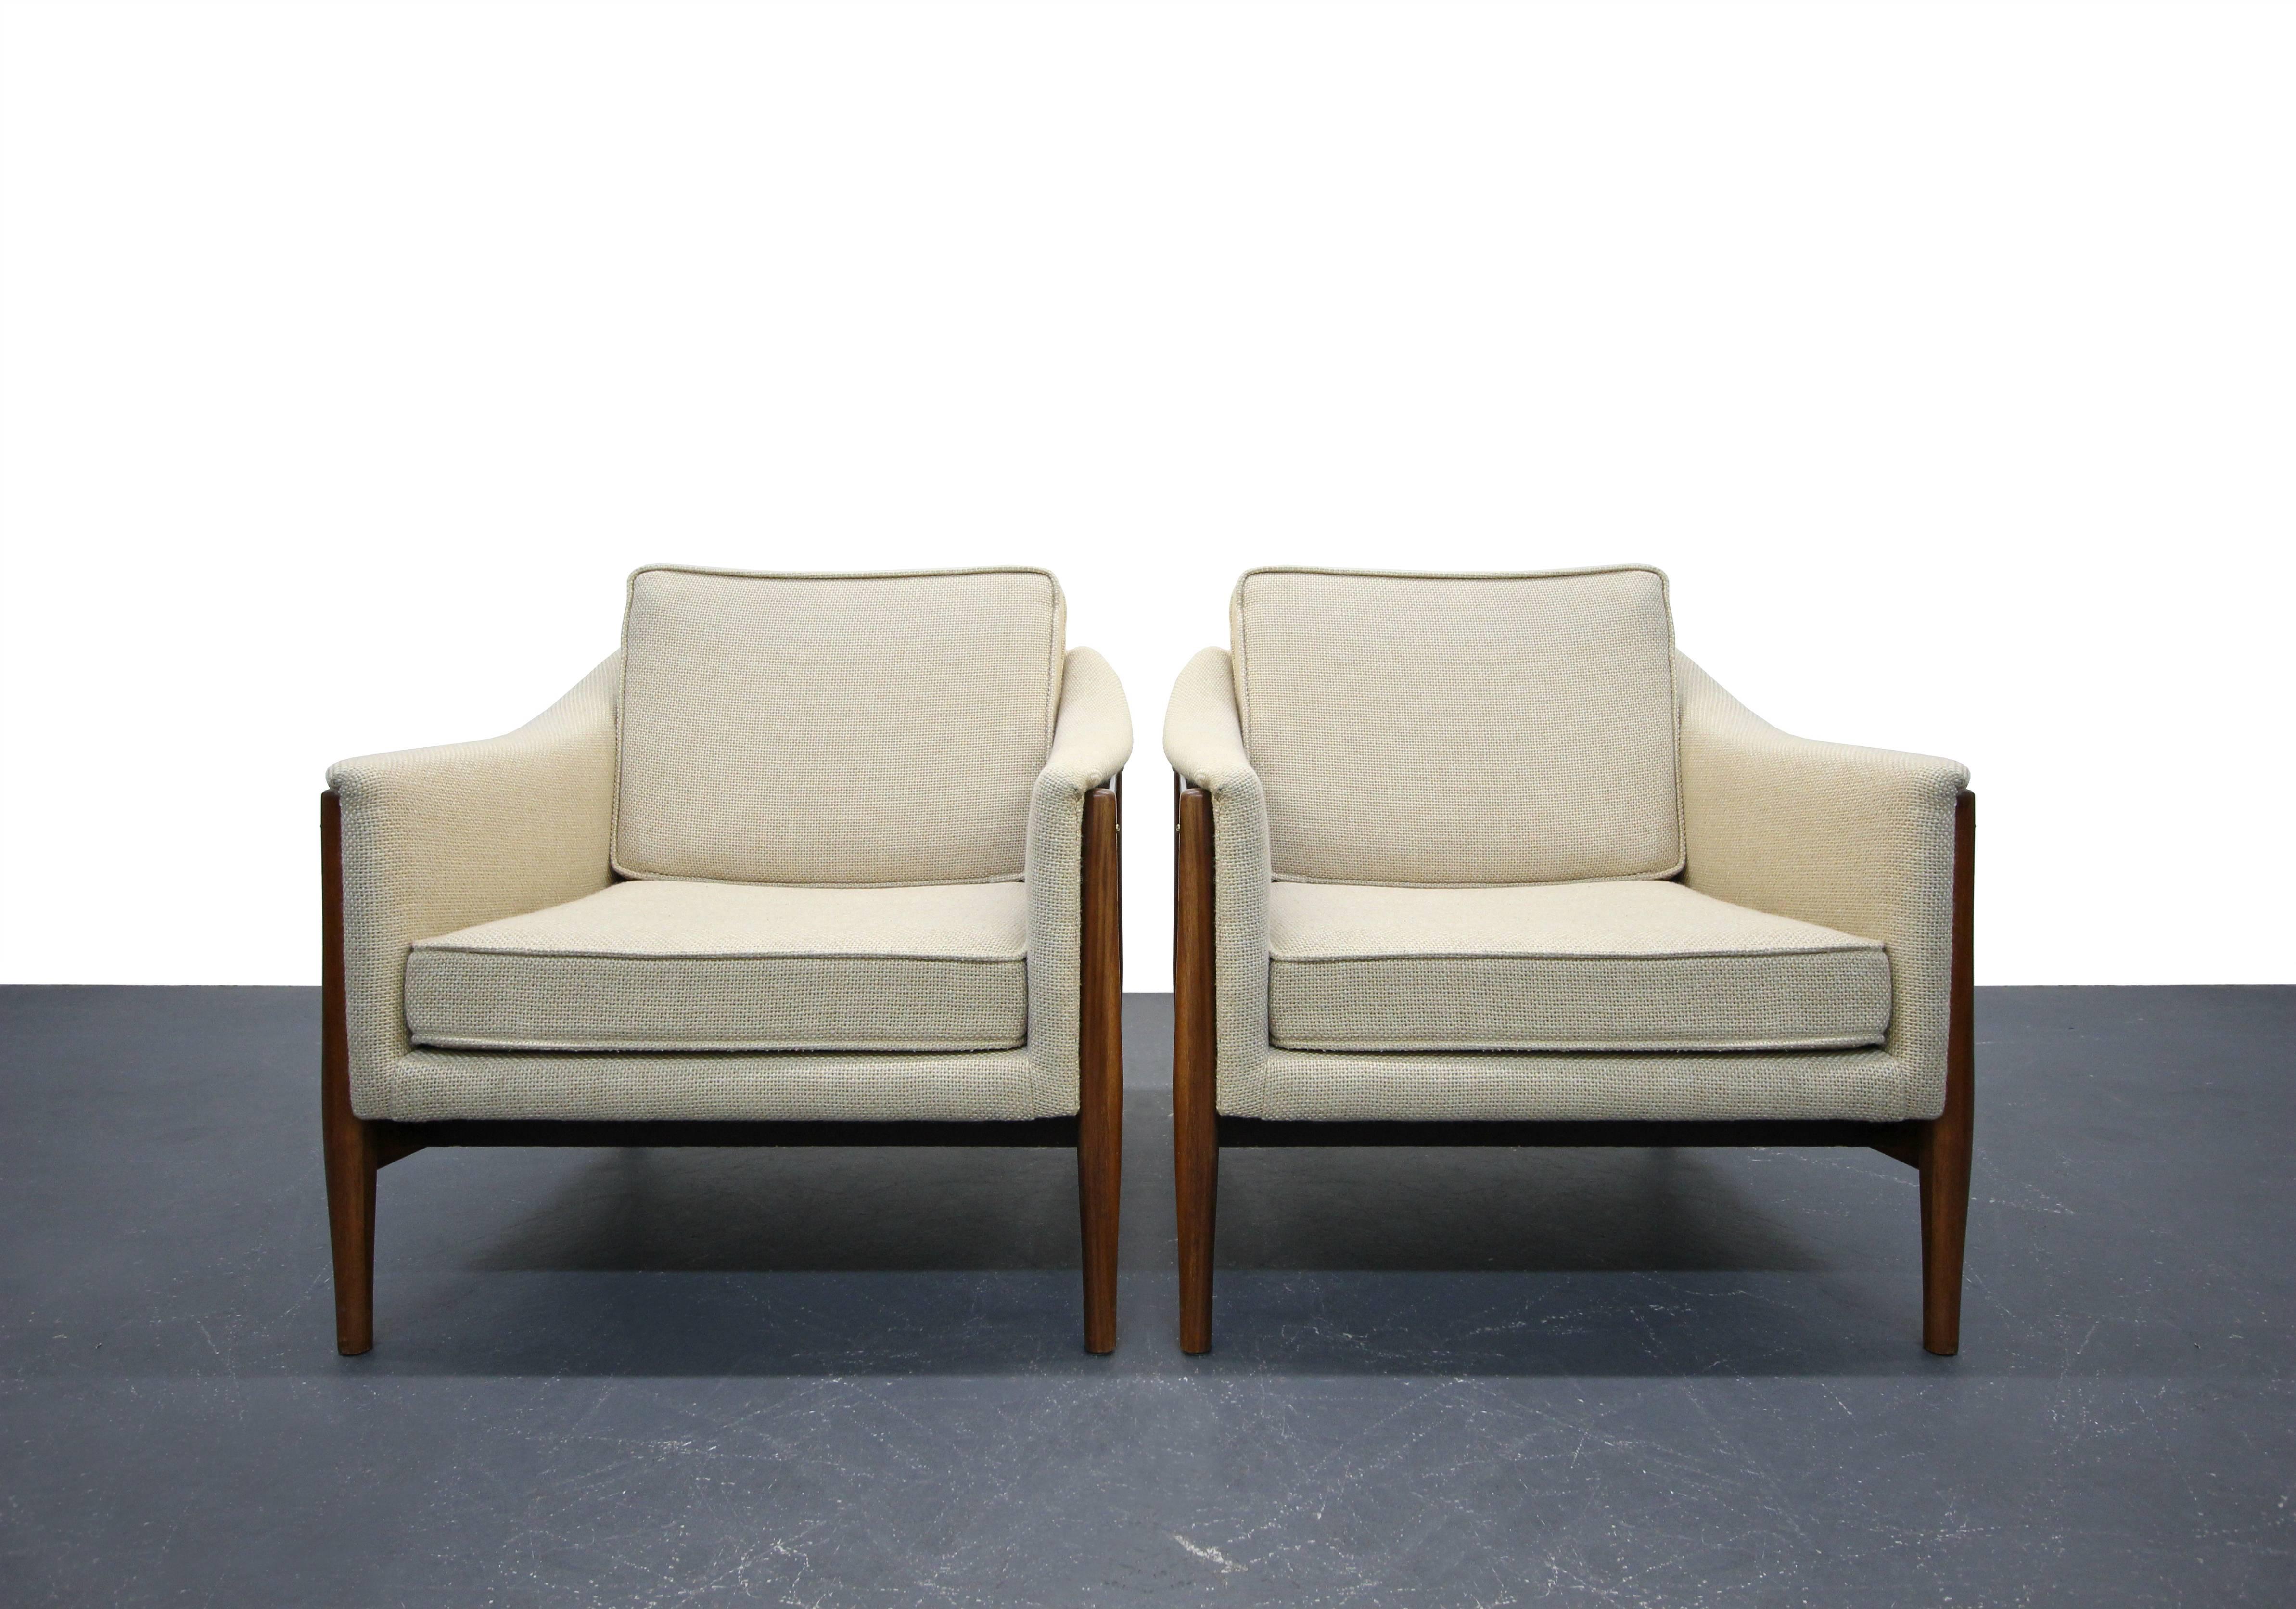 All original pair of Danish Mid-Century Modern lounge chairs in near perfect original condition. They are the epitome of Classic Mid-Century Modern chairs. These chairs are heavy duty, solid pieces in excellent condition.

For those not keen to